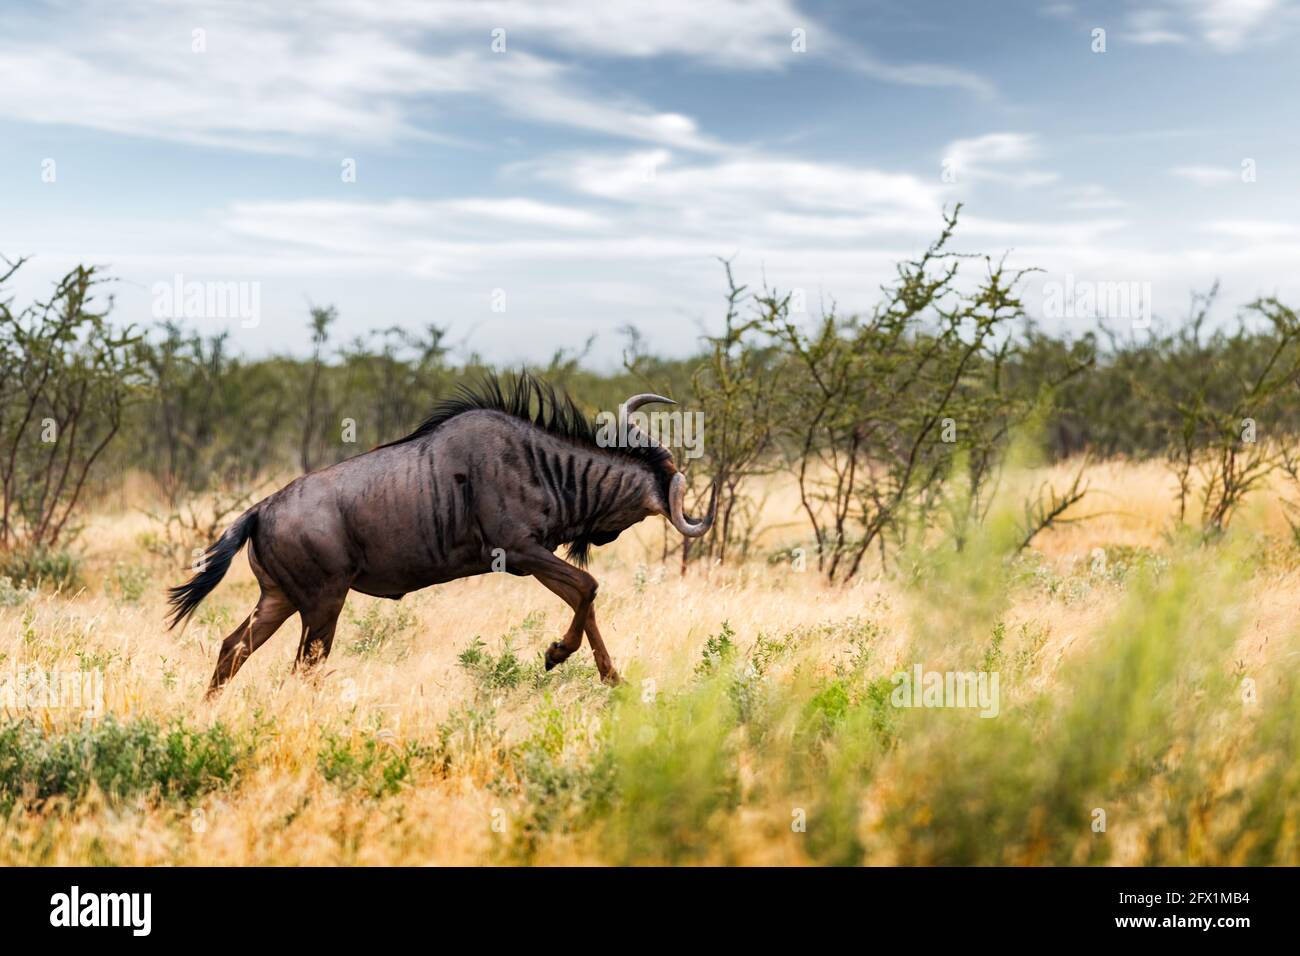 Large african antelope Gnu (Blue wildebeest, Connochaetes taurinus) running in yellow dry grass at the evening in Namibian savanna. Wildlife photography in Africa Stock Photo